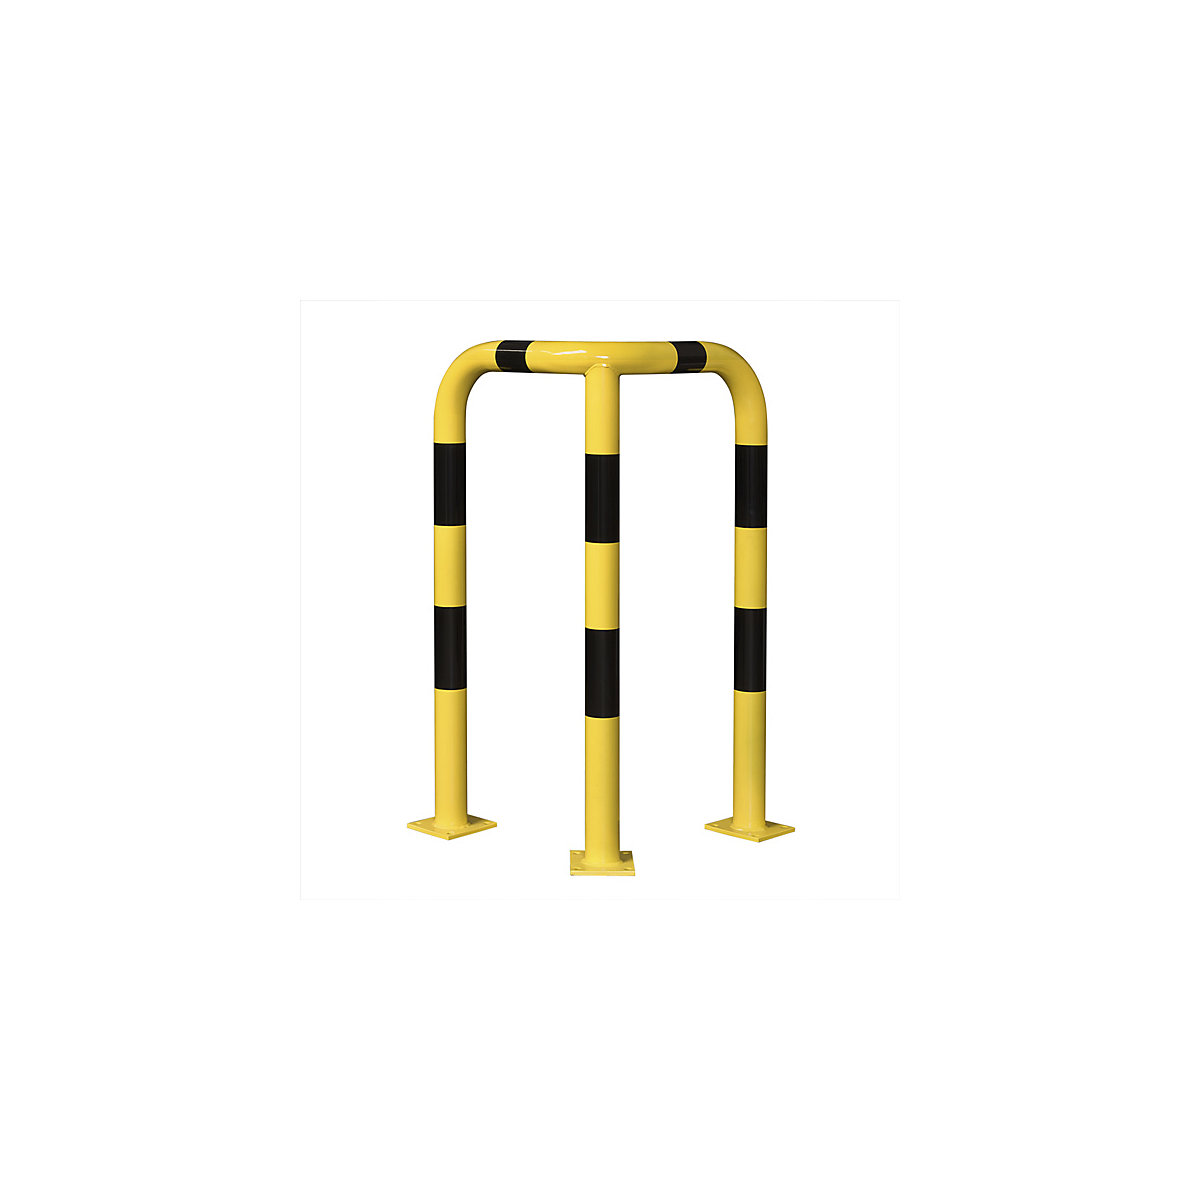 Crash protection corner, Ø 76 mm, for outdoor use, height 1200 mm, yellow/black